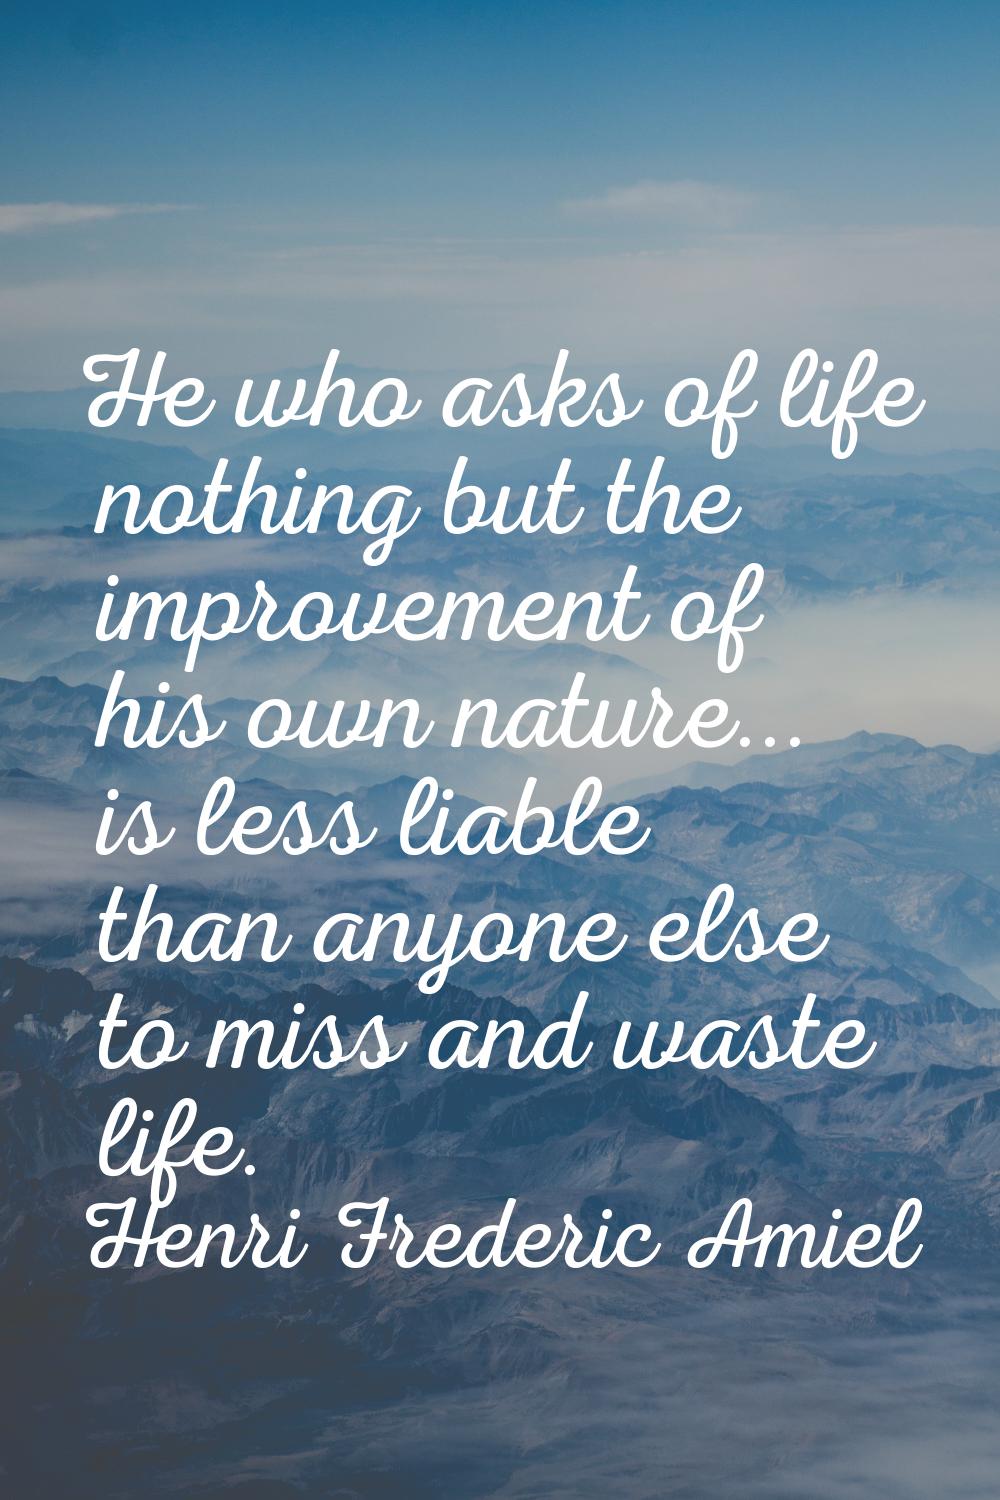 He who asks of life nothing but the improvement of his own nature... is less liable than anyone els